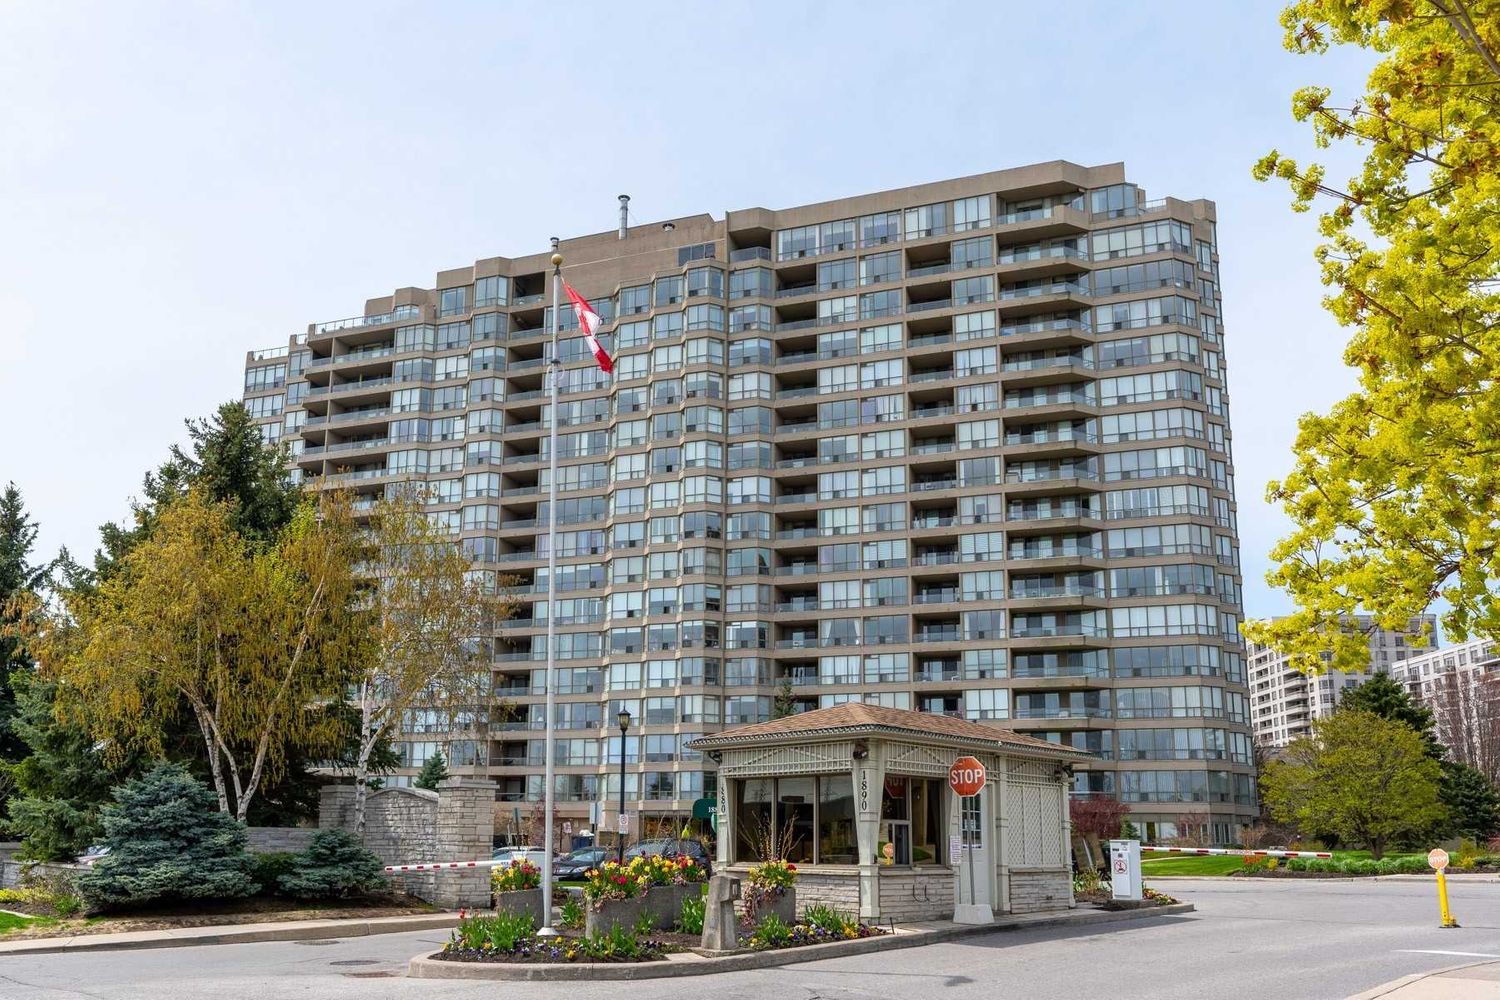 1880 Valley Farm Road. Discovery Place II Condos is located in  Pickering, Toronto - image #2 of 3